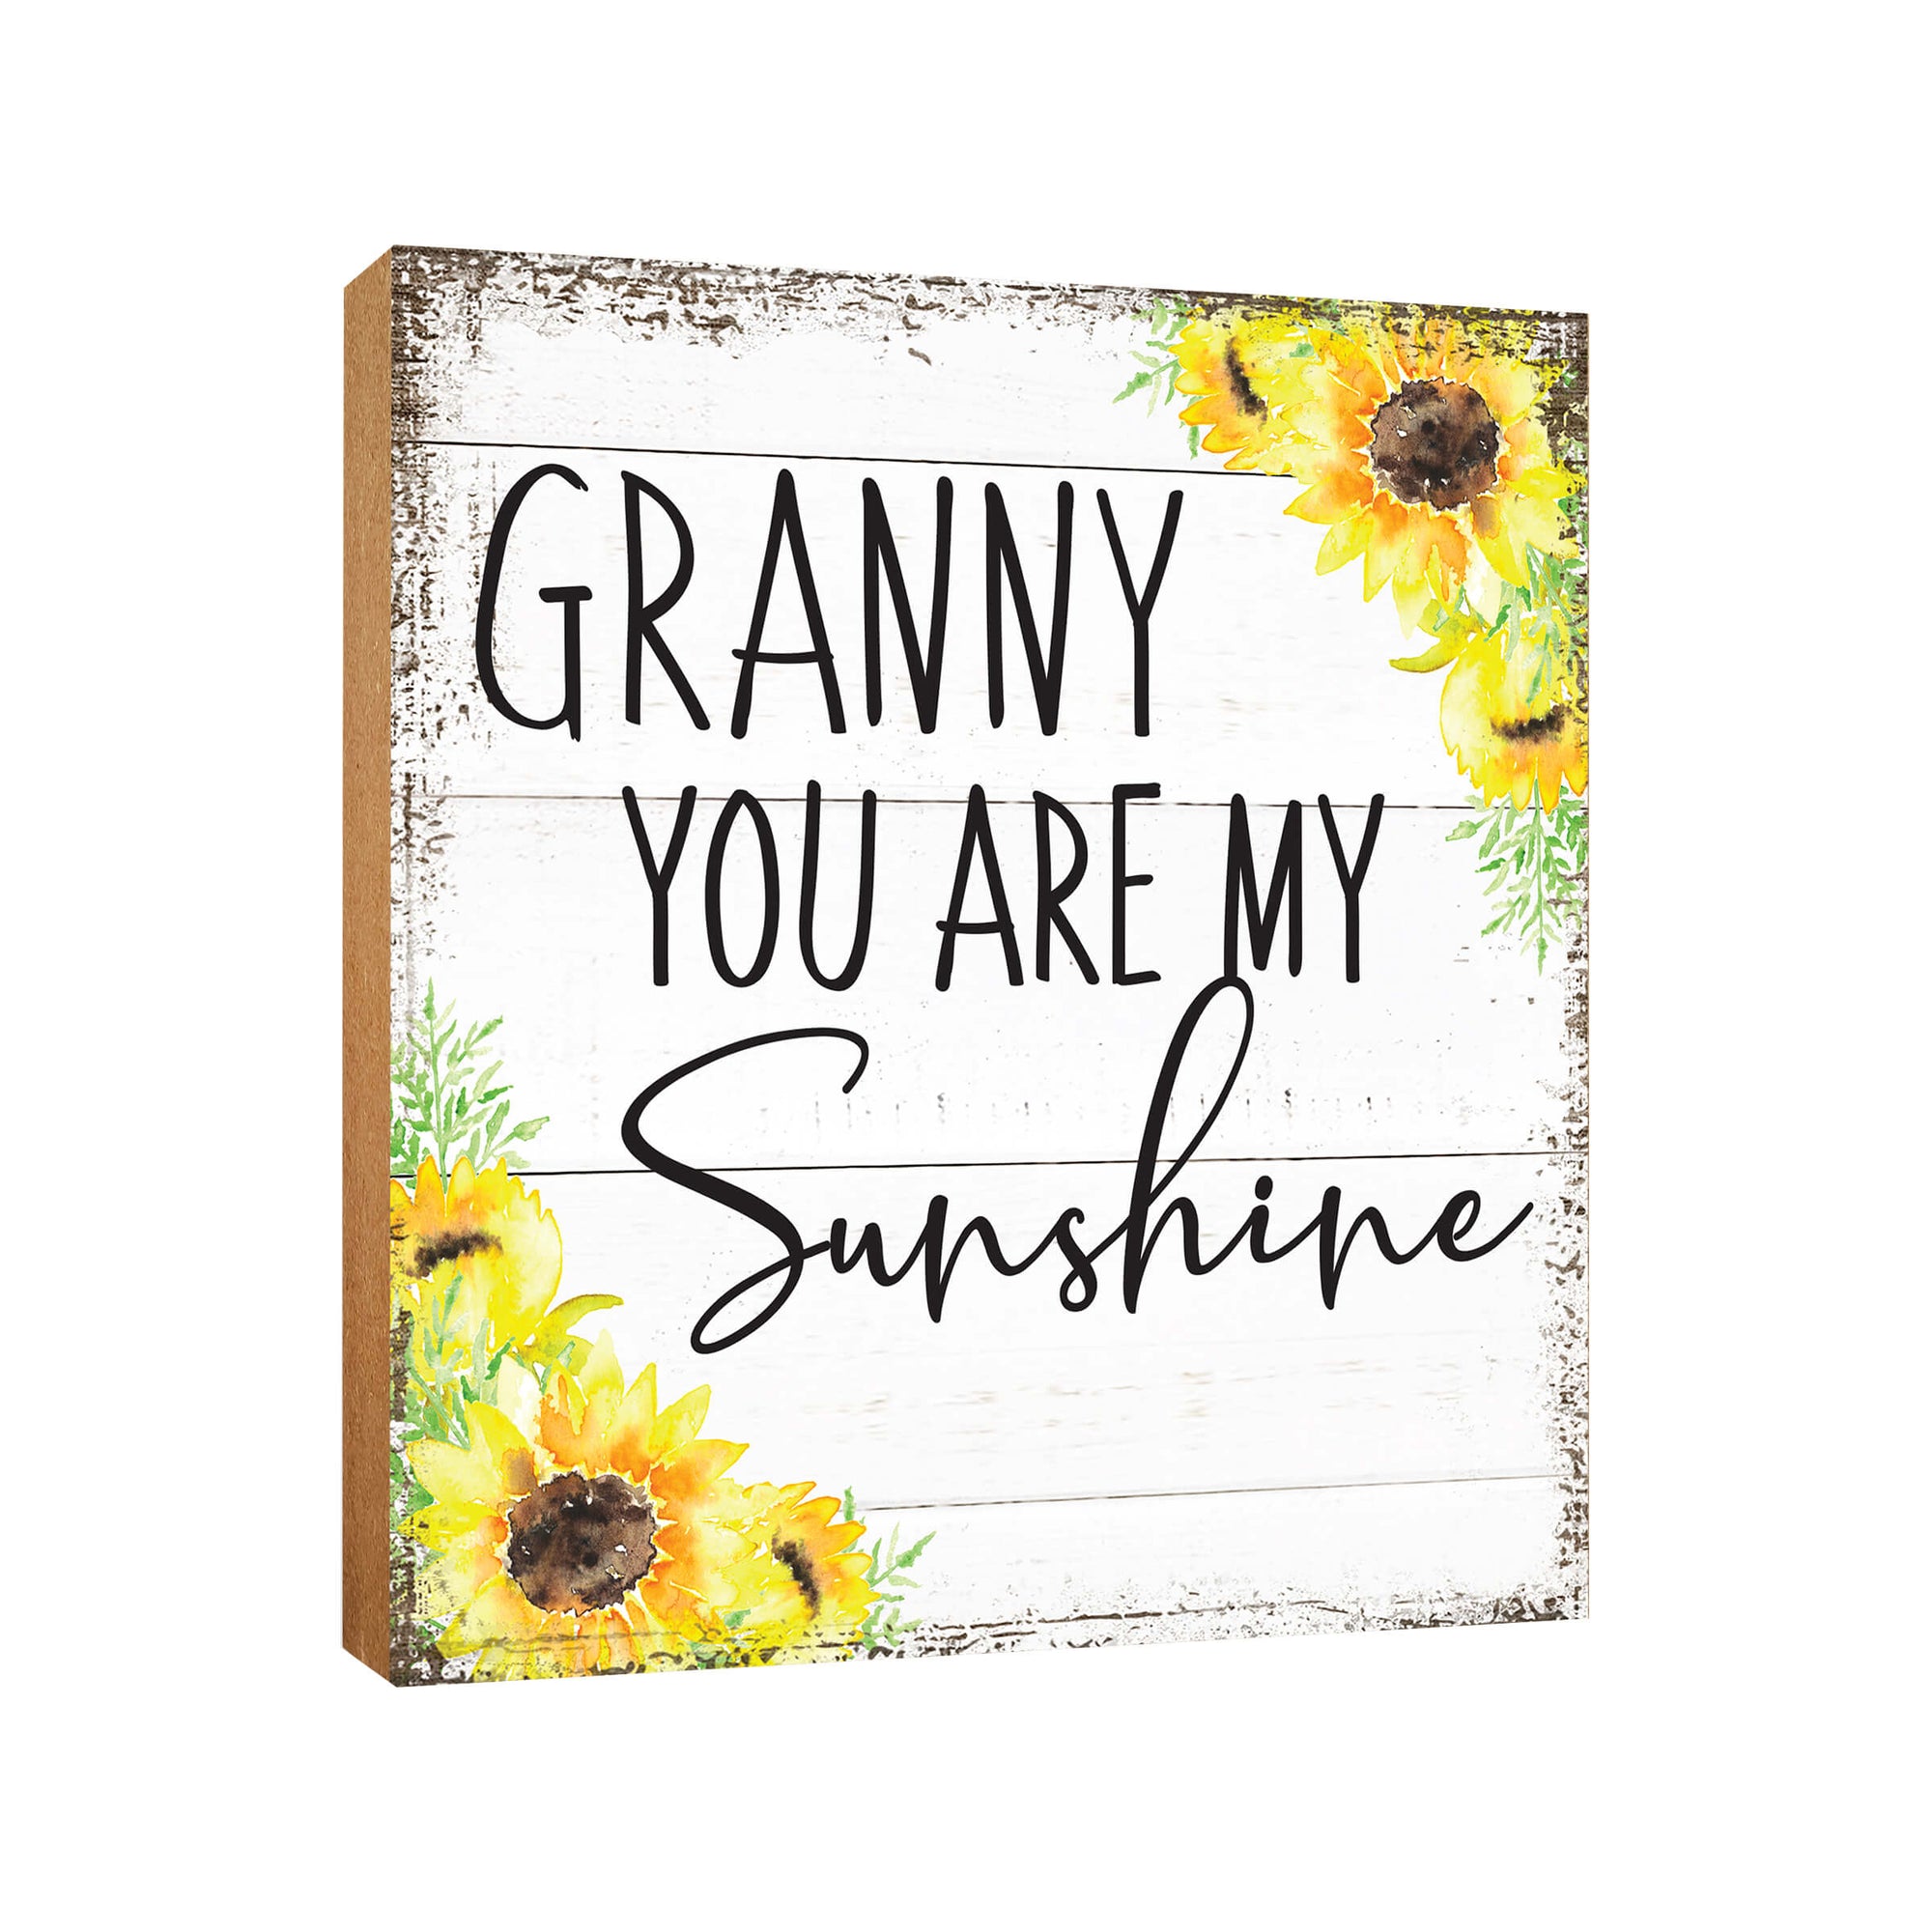 LifeSong Milestones Wooden Unique Shelf Decor and Table Top Signs for Grandmother